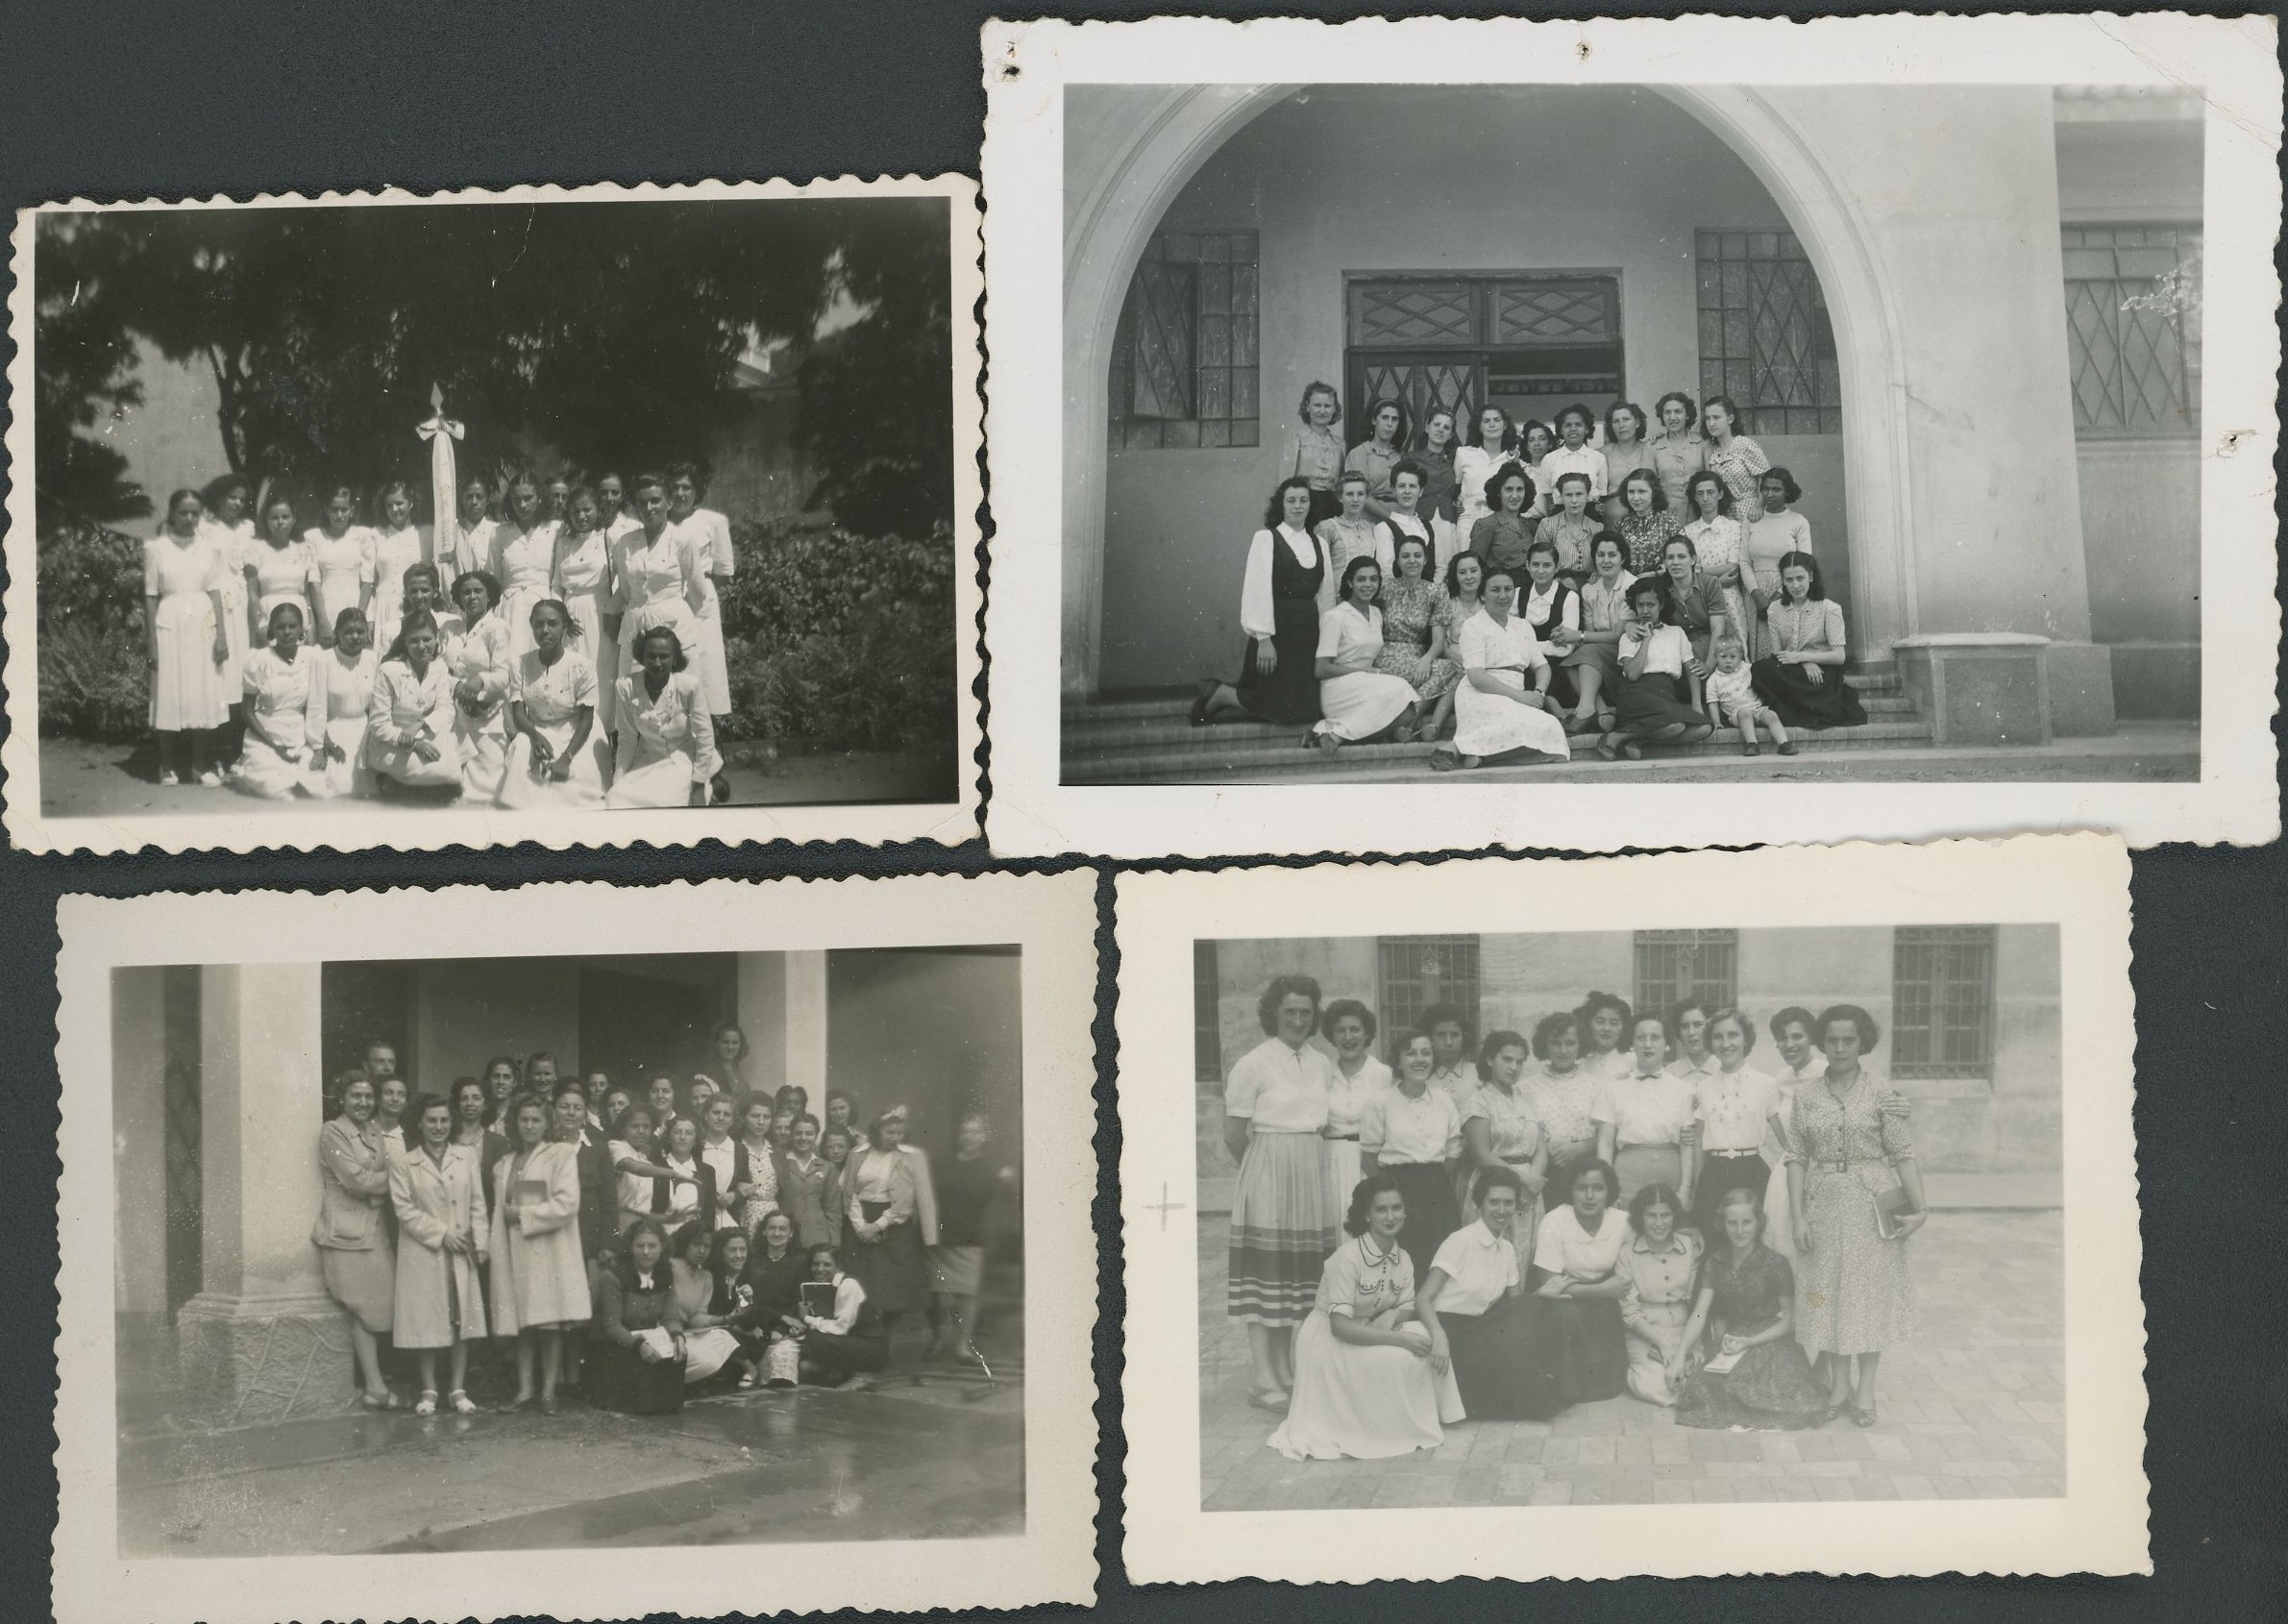 Photo’s of the local JOC-F sections of Pernambuco and São Paulo between 1946 and 1954. On the bottom right hand photo you can see Denise Verschueren with one of her groups